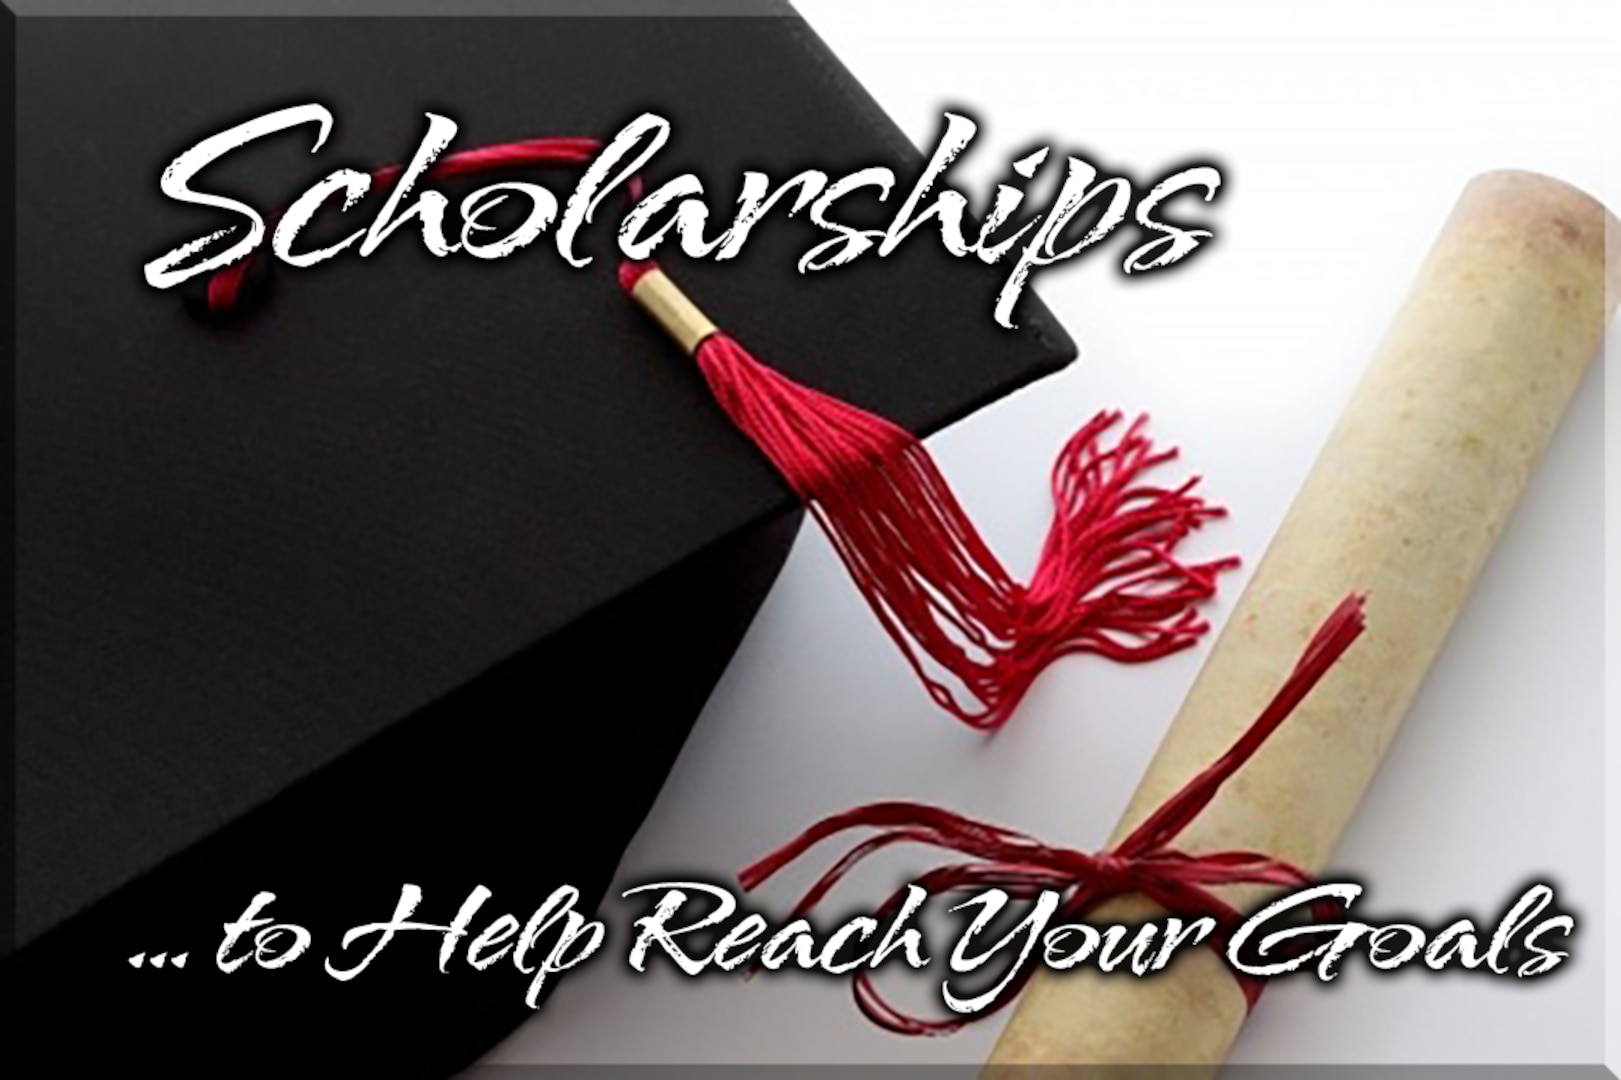 The DLA Foundation is offering scholarships to students who have a close family connection to a current or past Defense Logistics Agency employee.